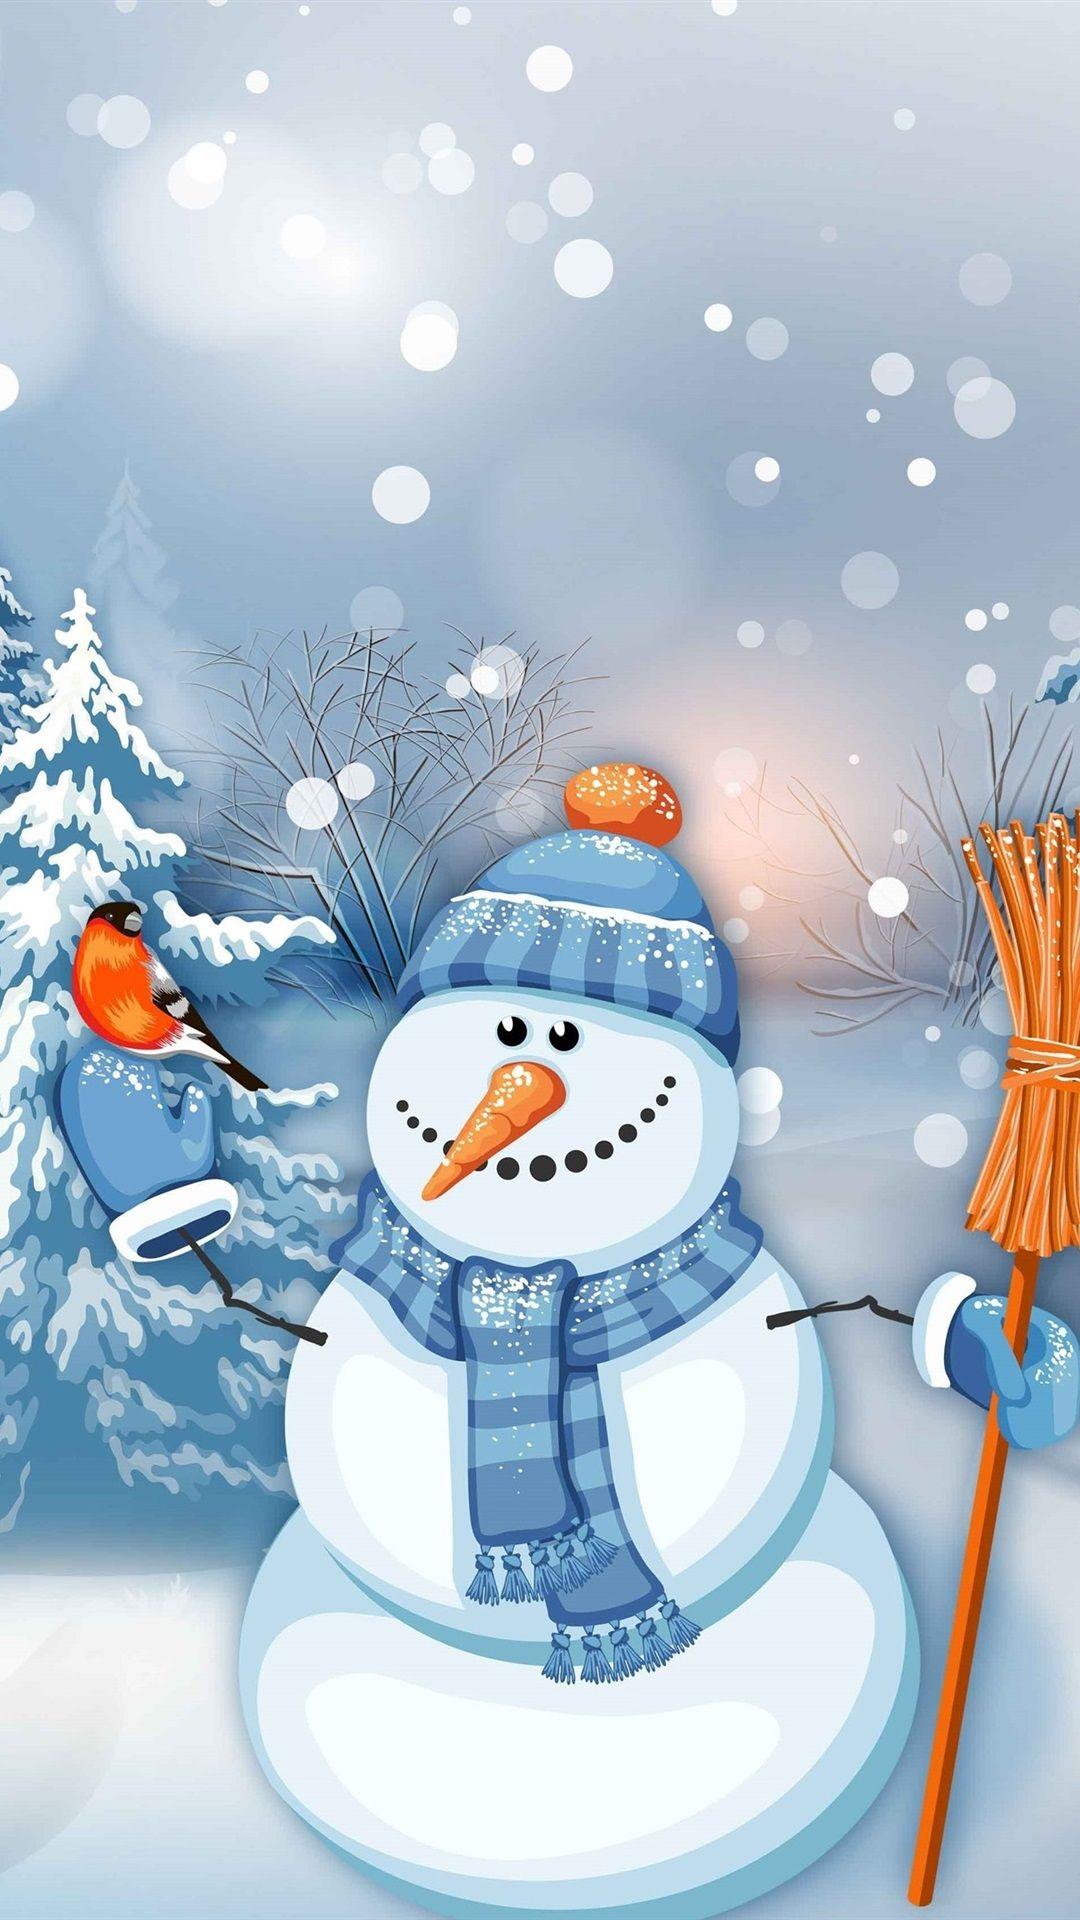 Download wallpaper 800x1200 snowman winter christmas new year cute  illustration iphone 4s4 for parallax hd background